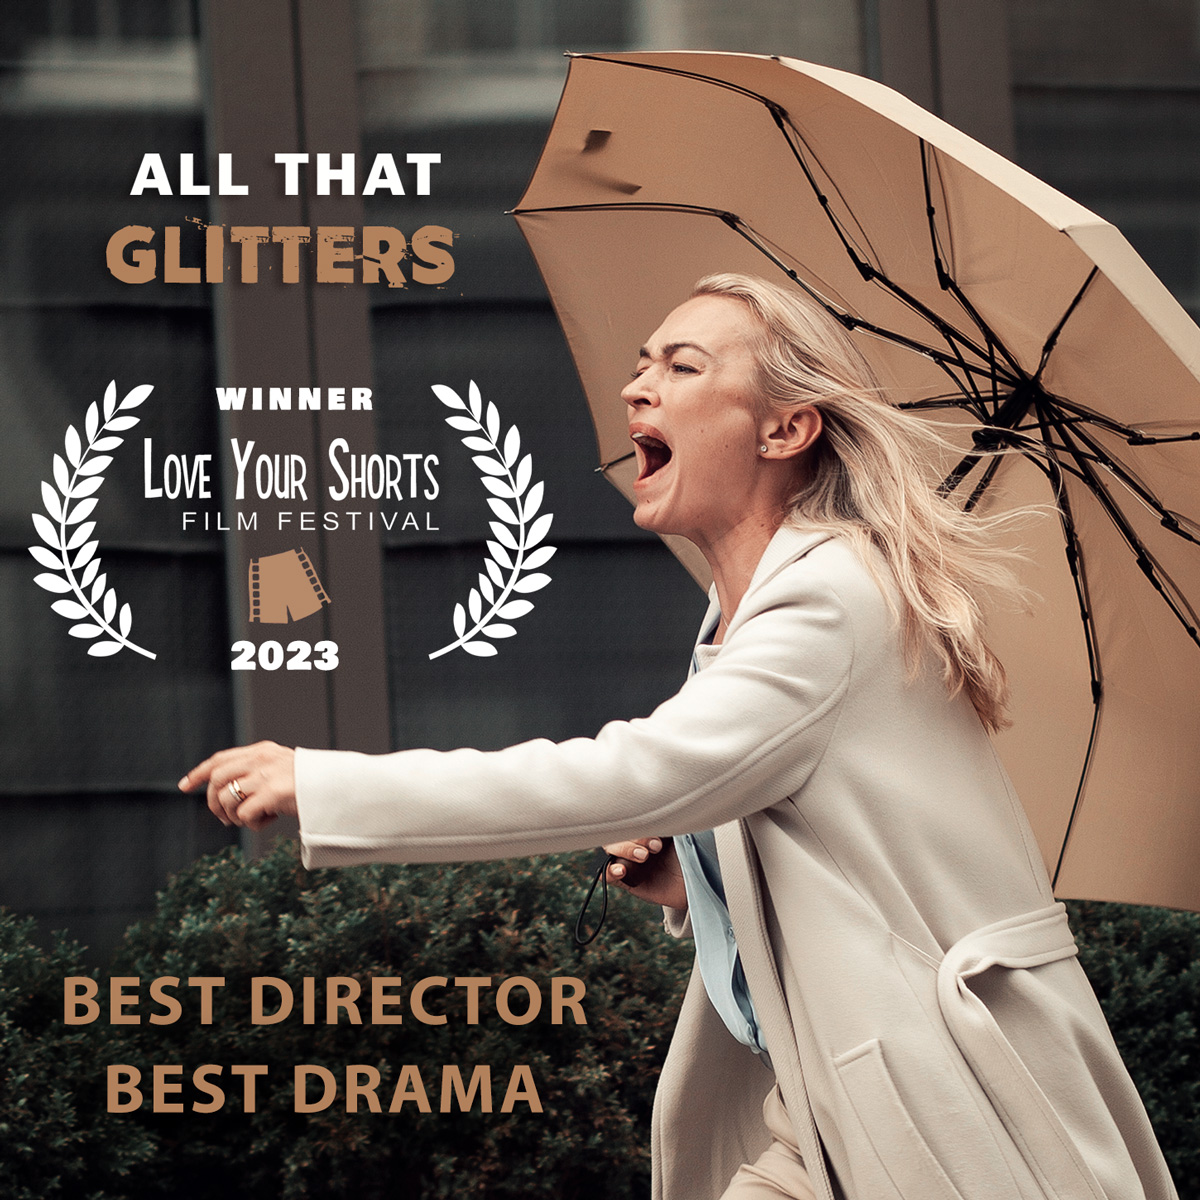 Can't believe #AllThatGlitters just scooped two more awards at Love Your Shorts Film Festival in Florida! 

BEST DIRECTOR and BEST DRAMA !!

Lovely way to start the week and 2023 😀

#shortfilm #britfilm #ukfilm #britdirector #awardwinningfilm #awardwinningshort #indiefilm